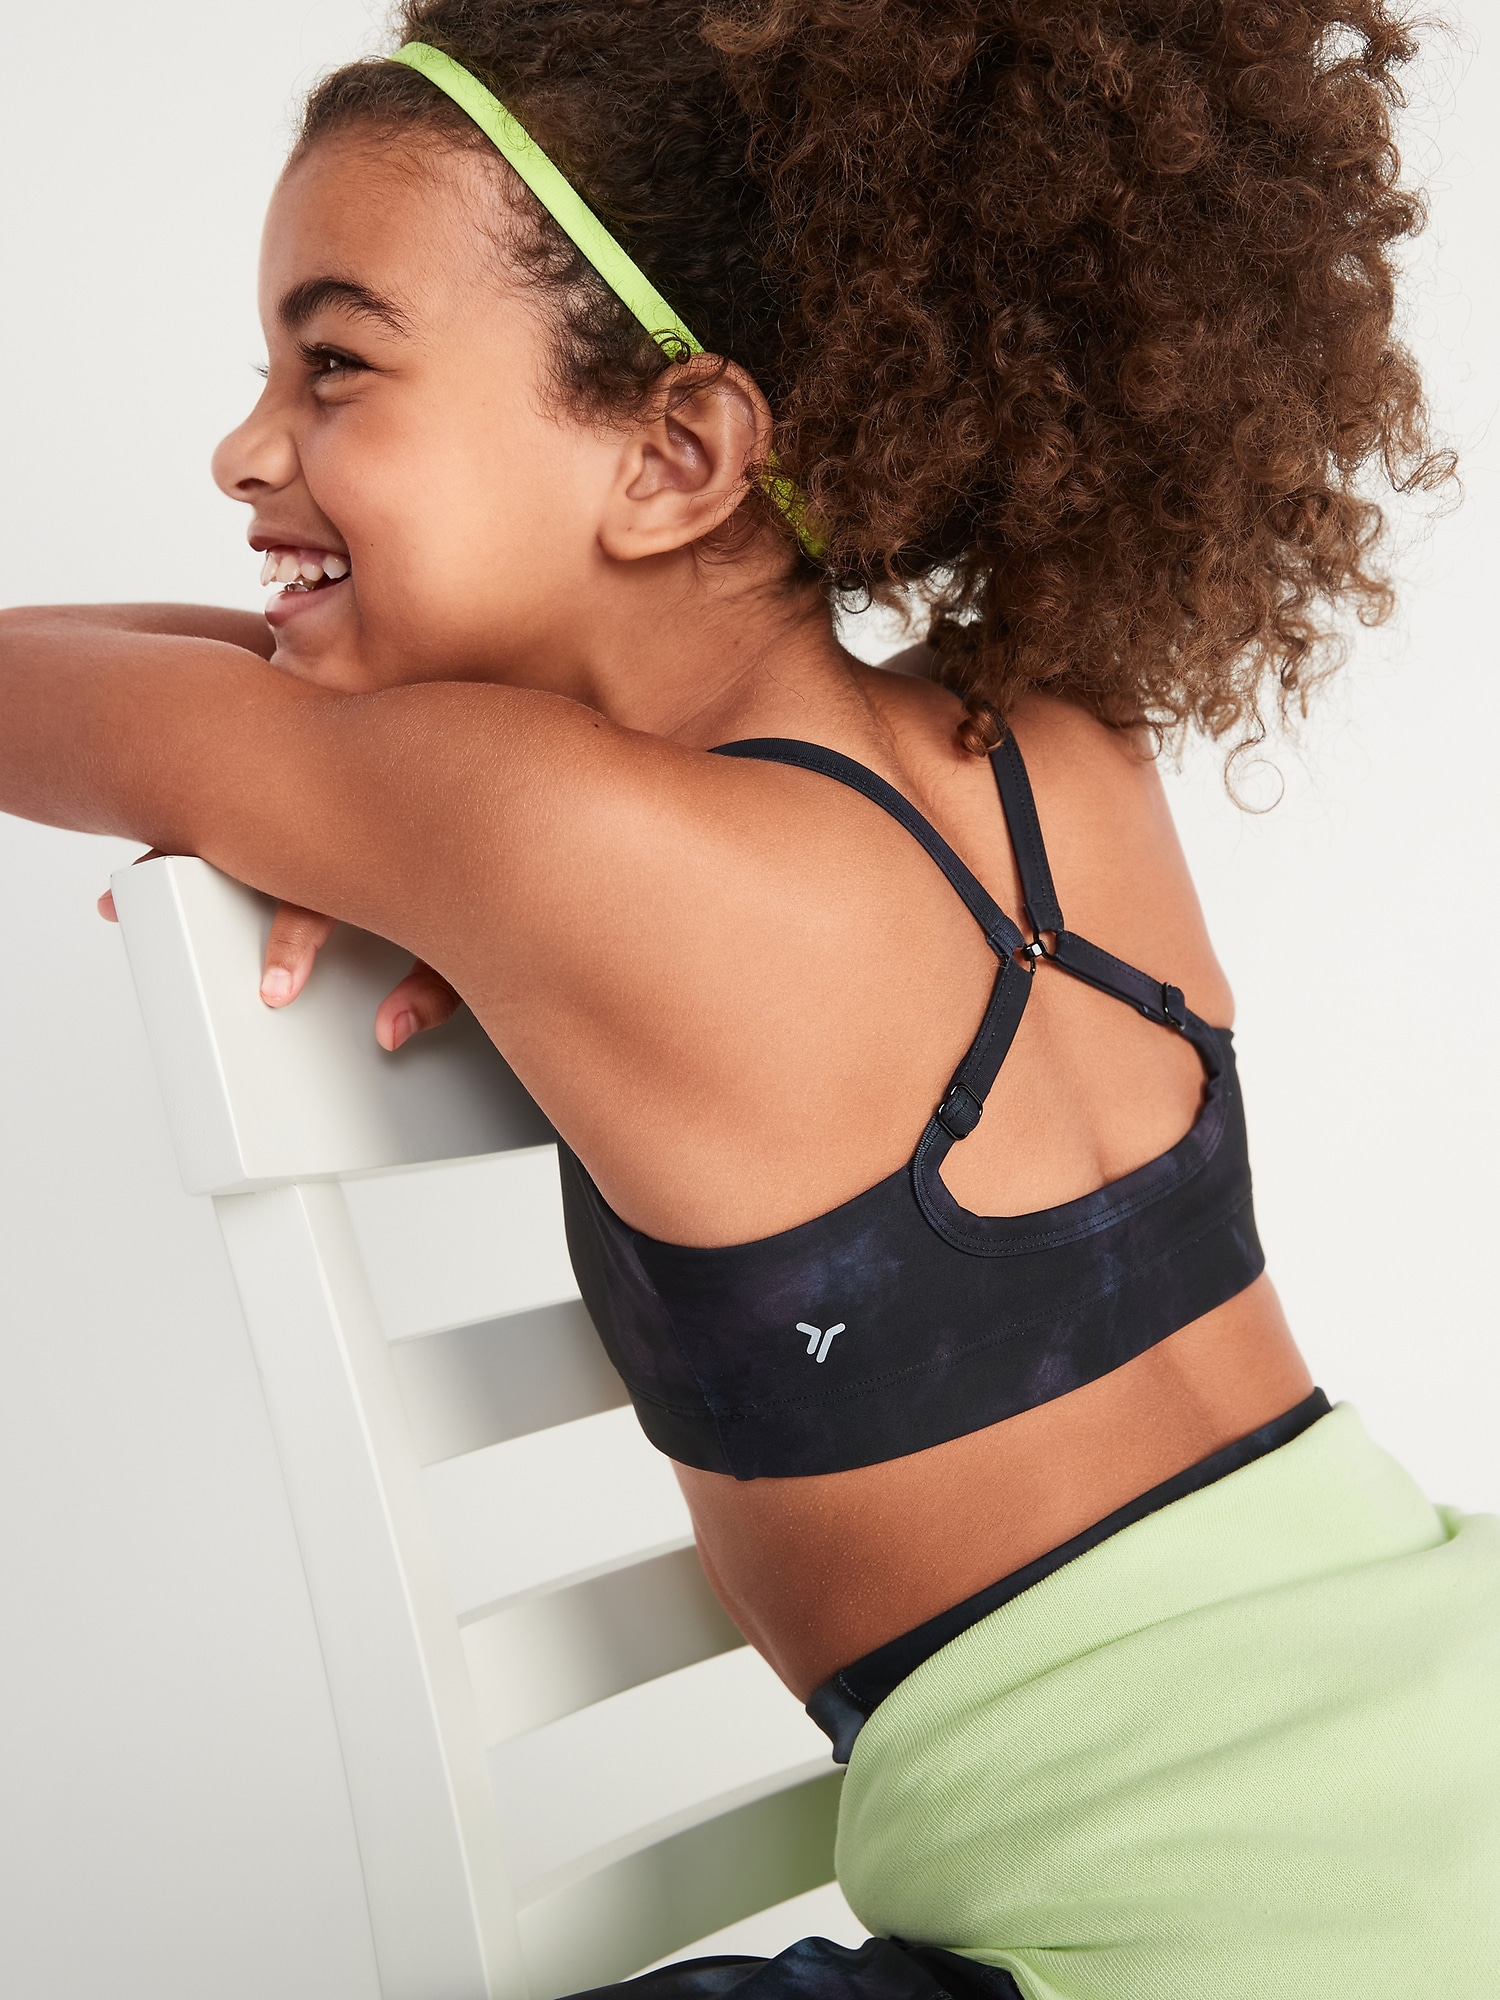 Powersoft Everyday Convertible-Strap Bra for Girls